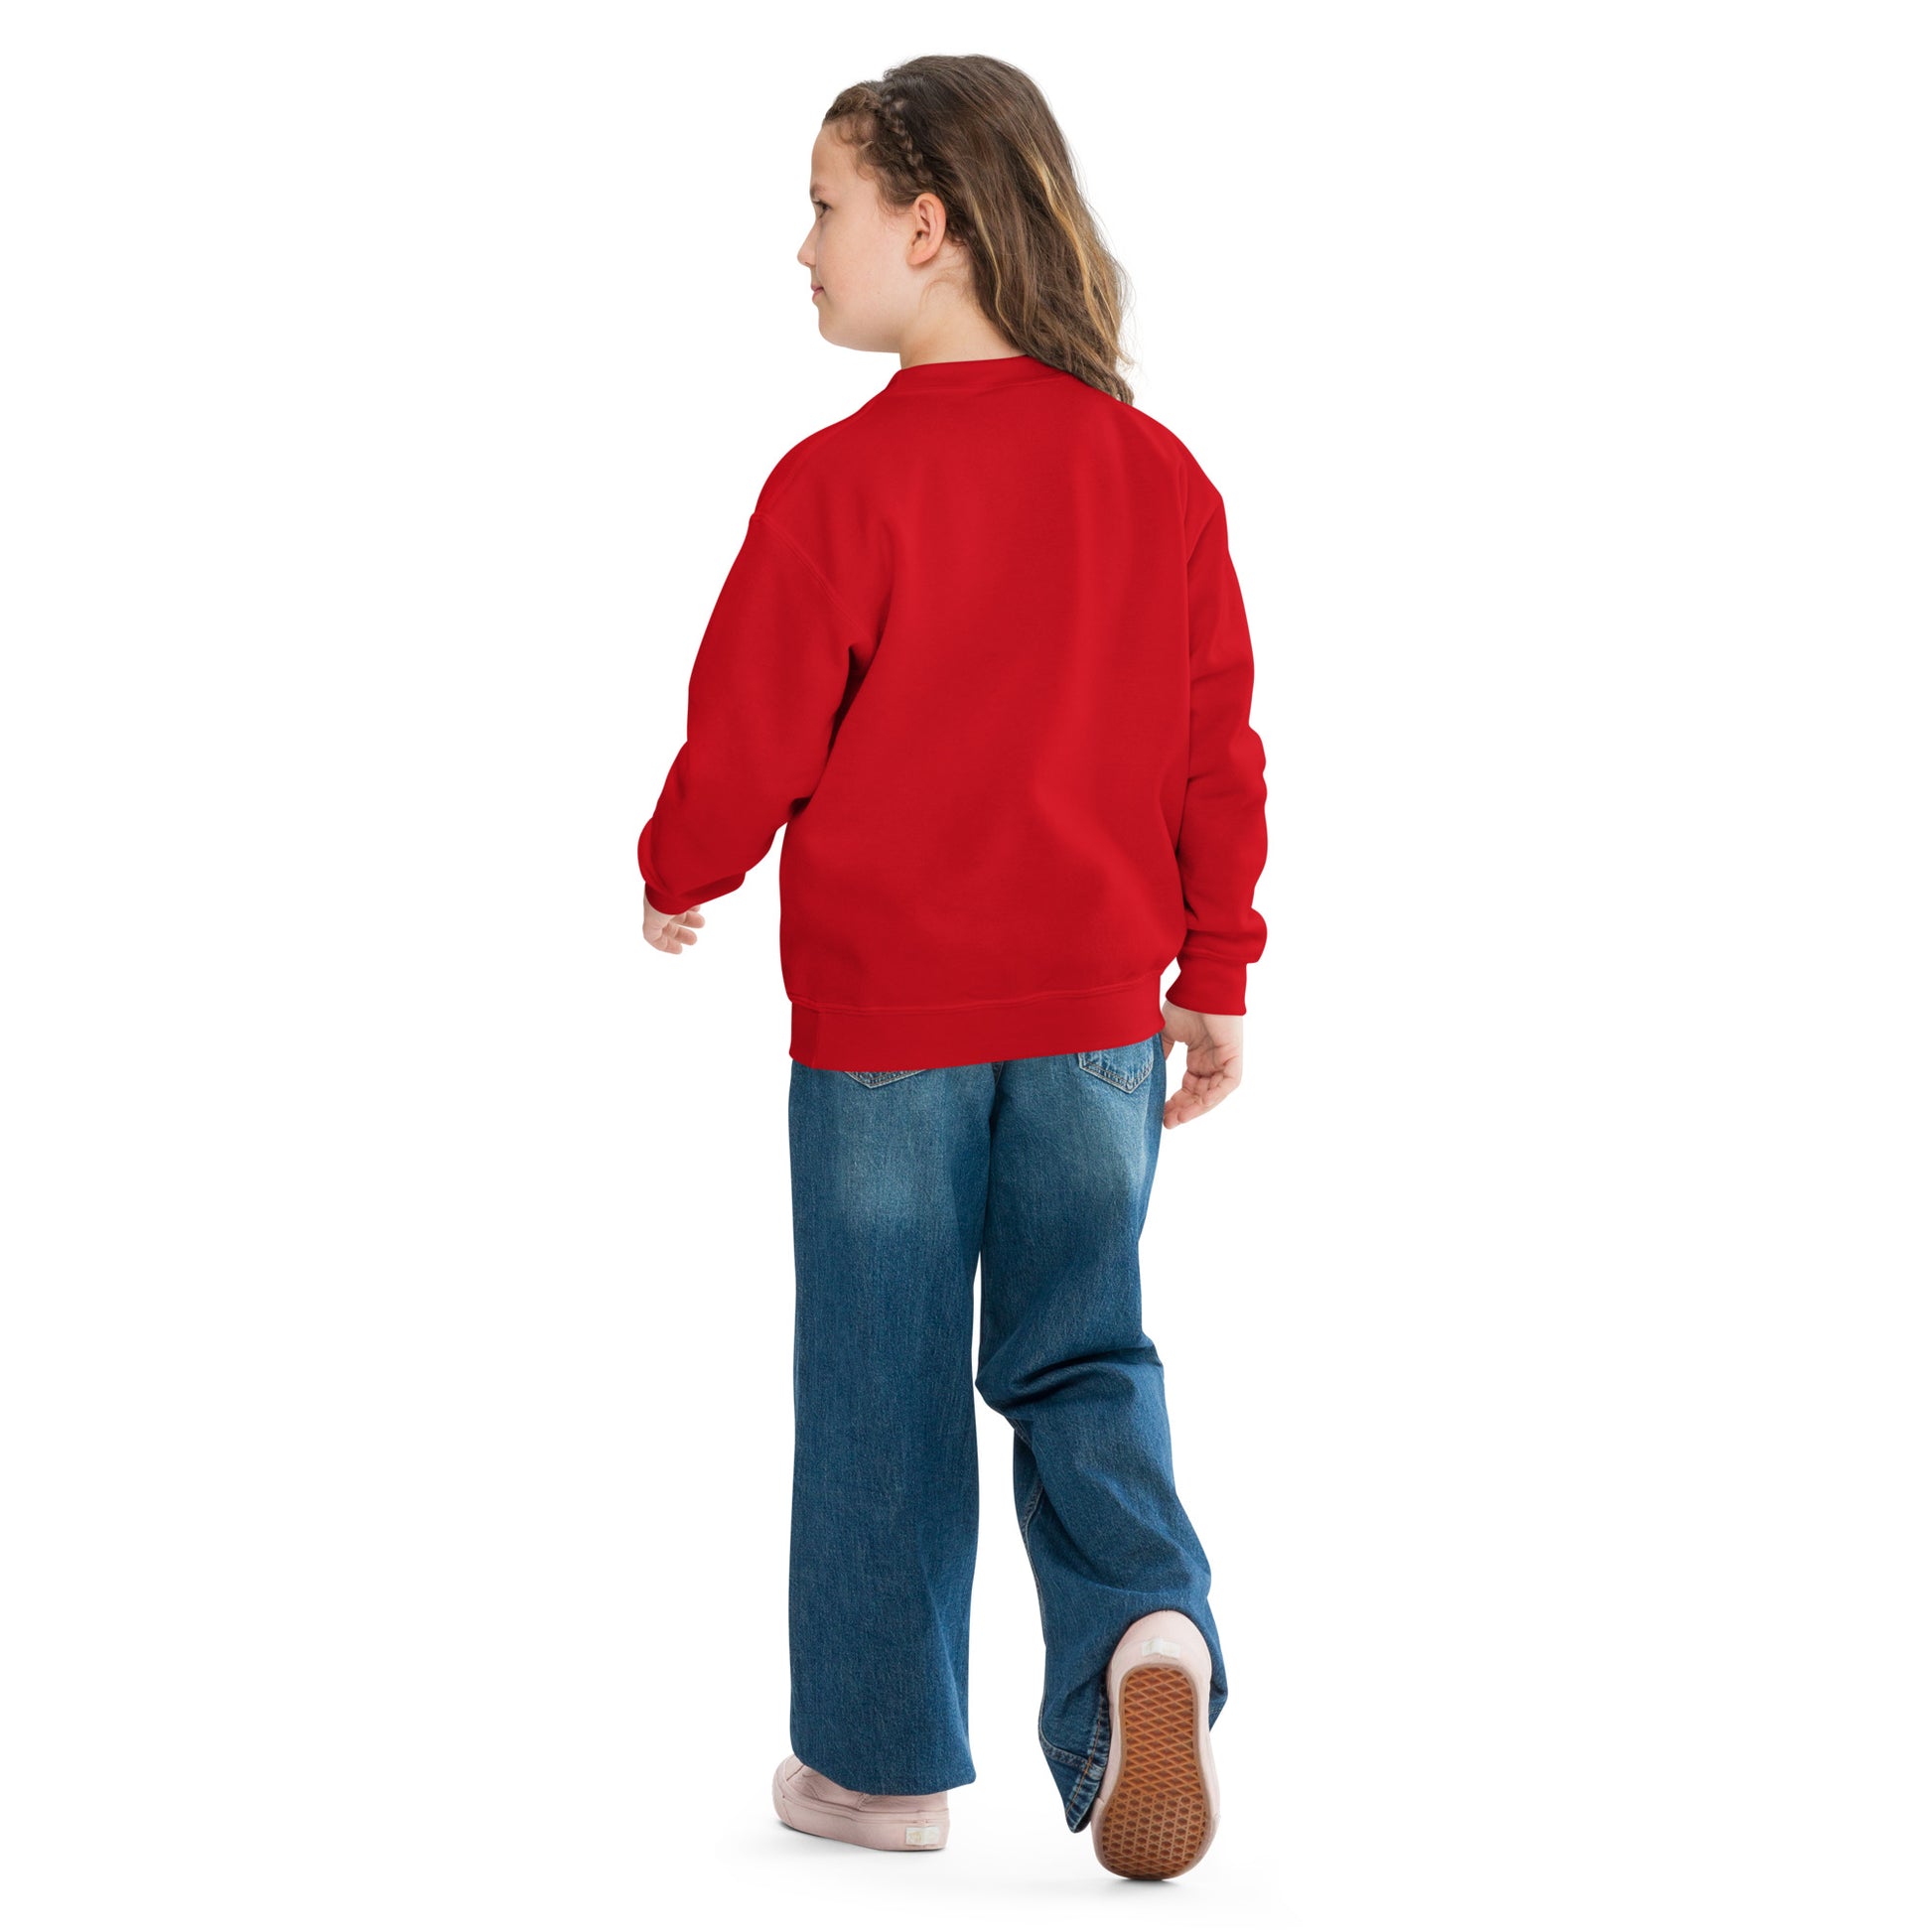 a little girl in a red sweatshirt and jeans